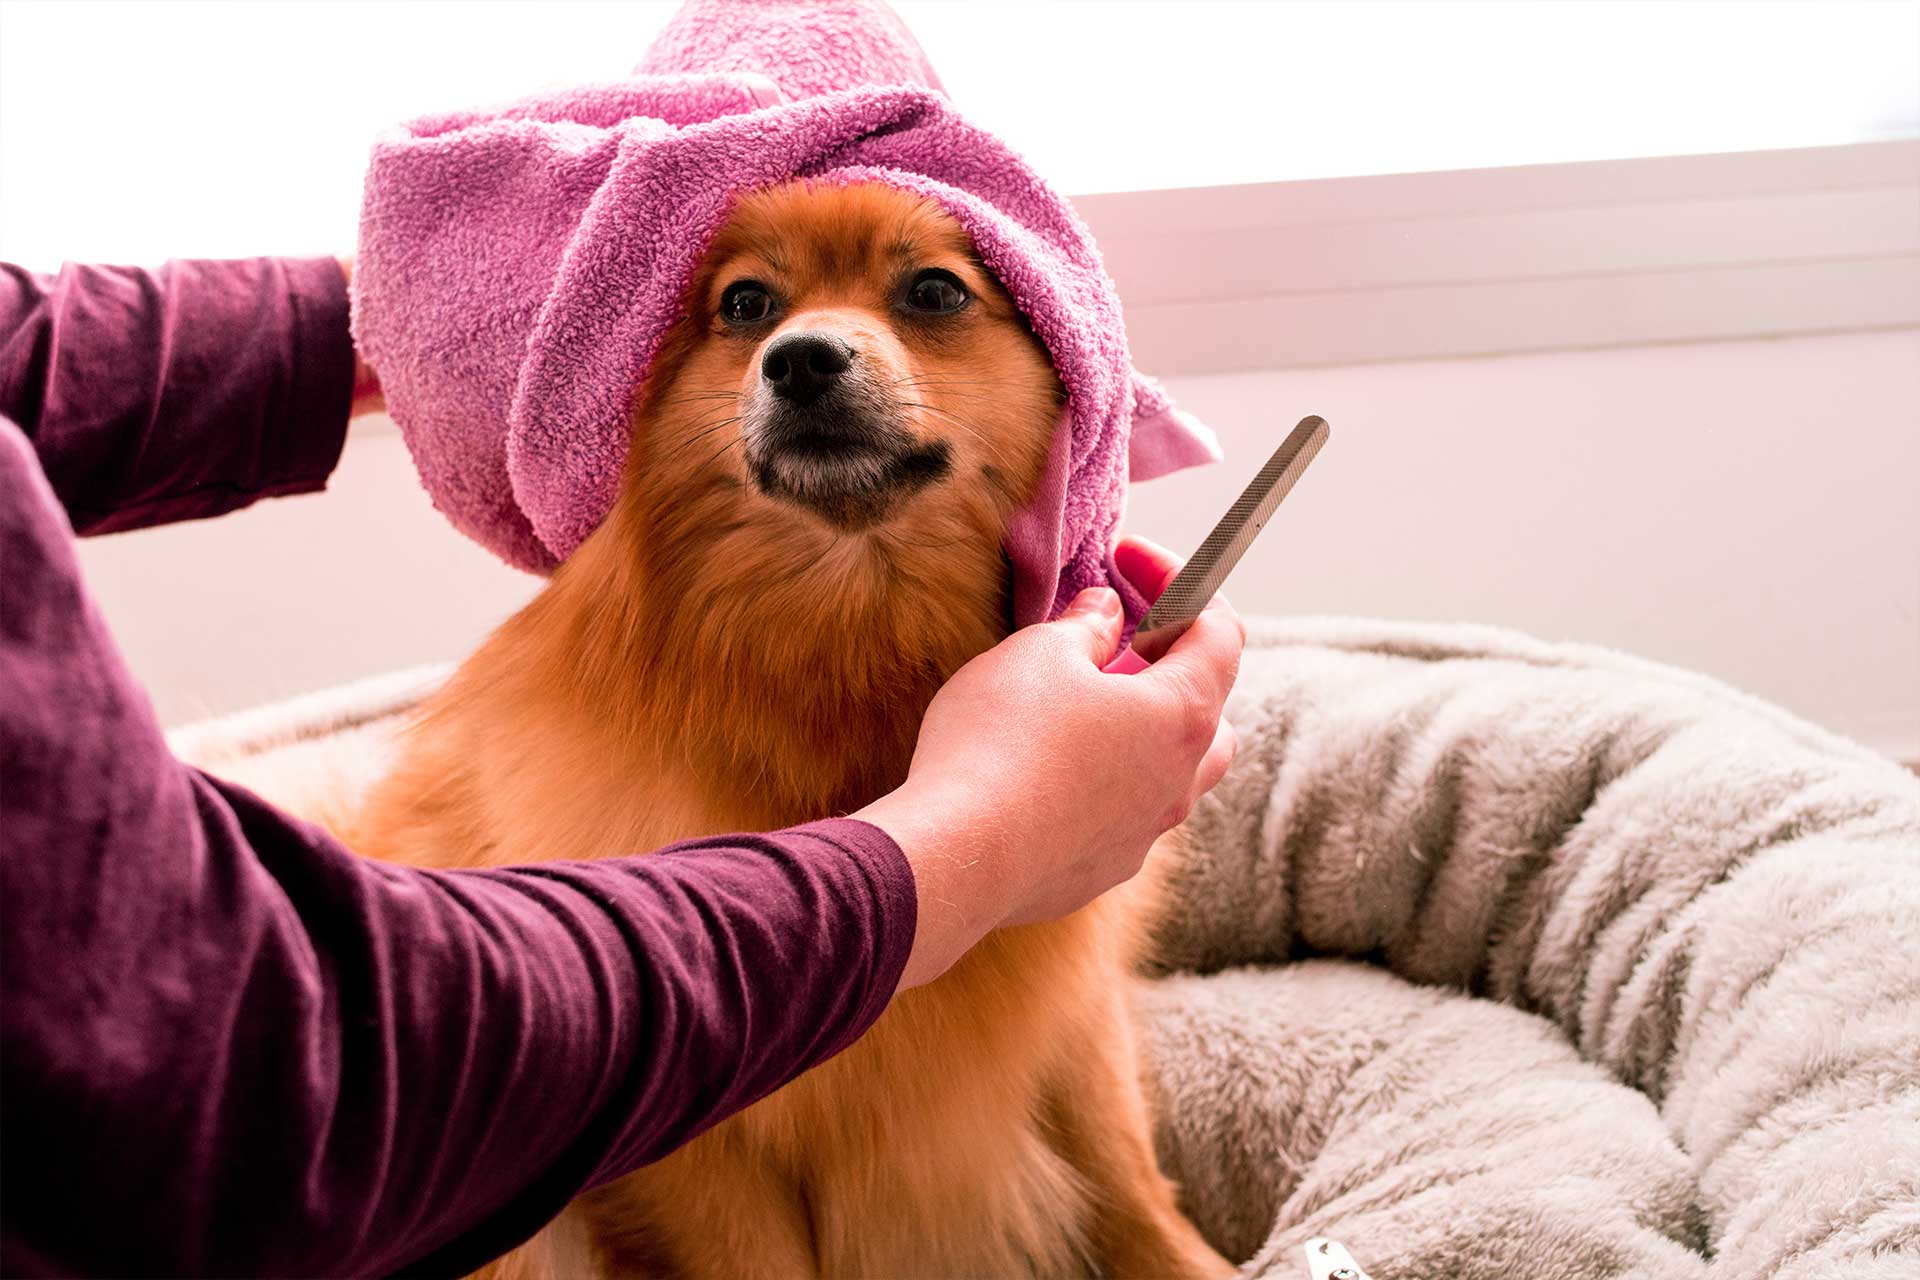 orange Pomeranian being groomed while wearing a pink towel on its head